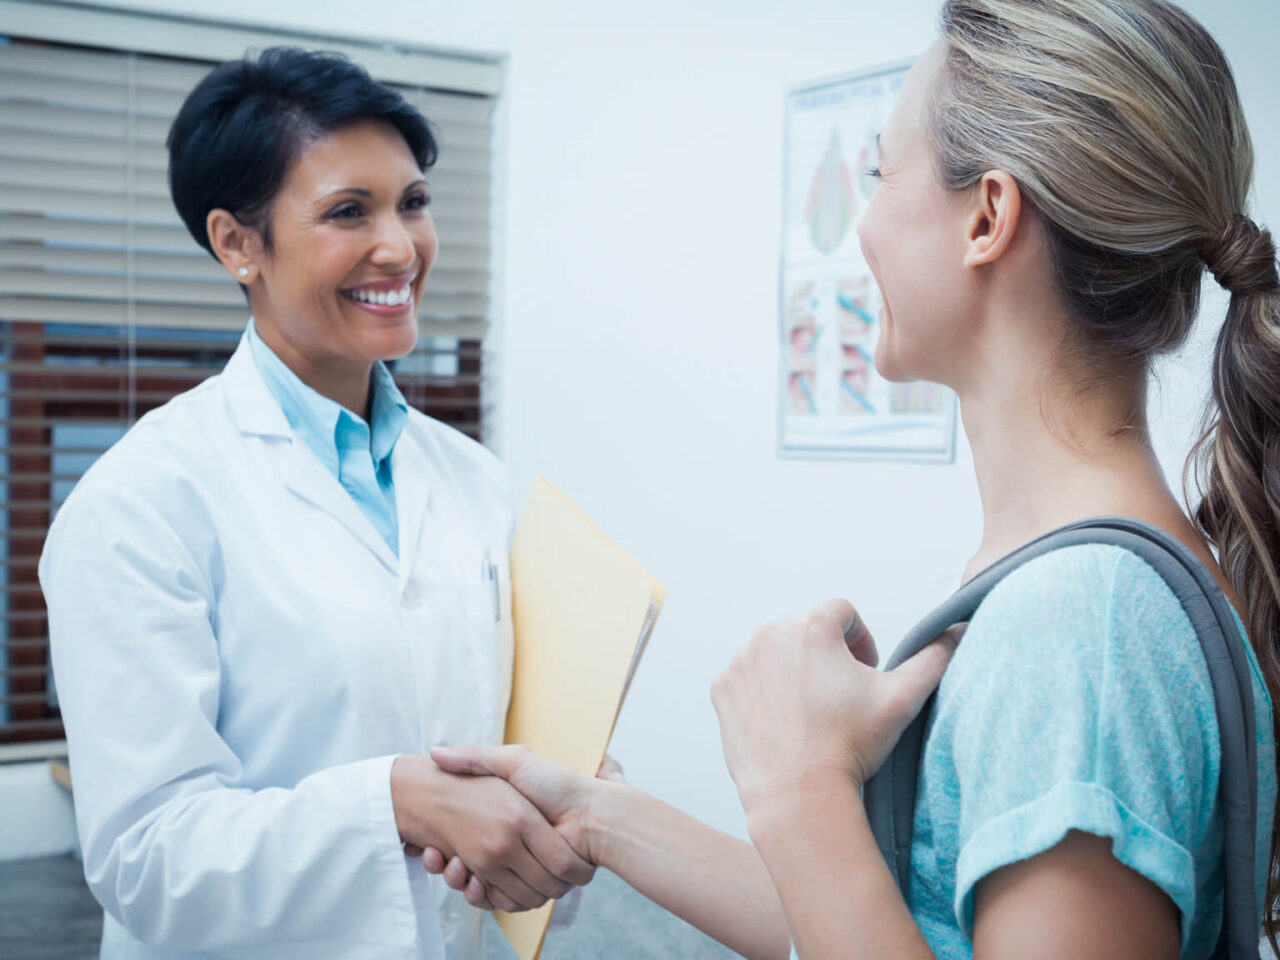 Female doctor shakes the hand of a female patient